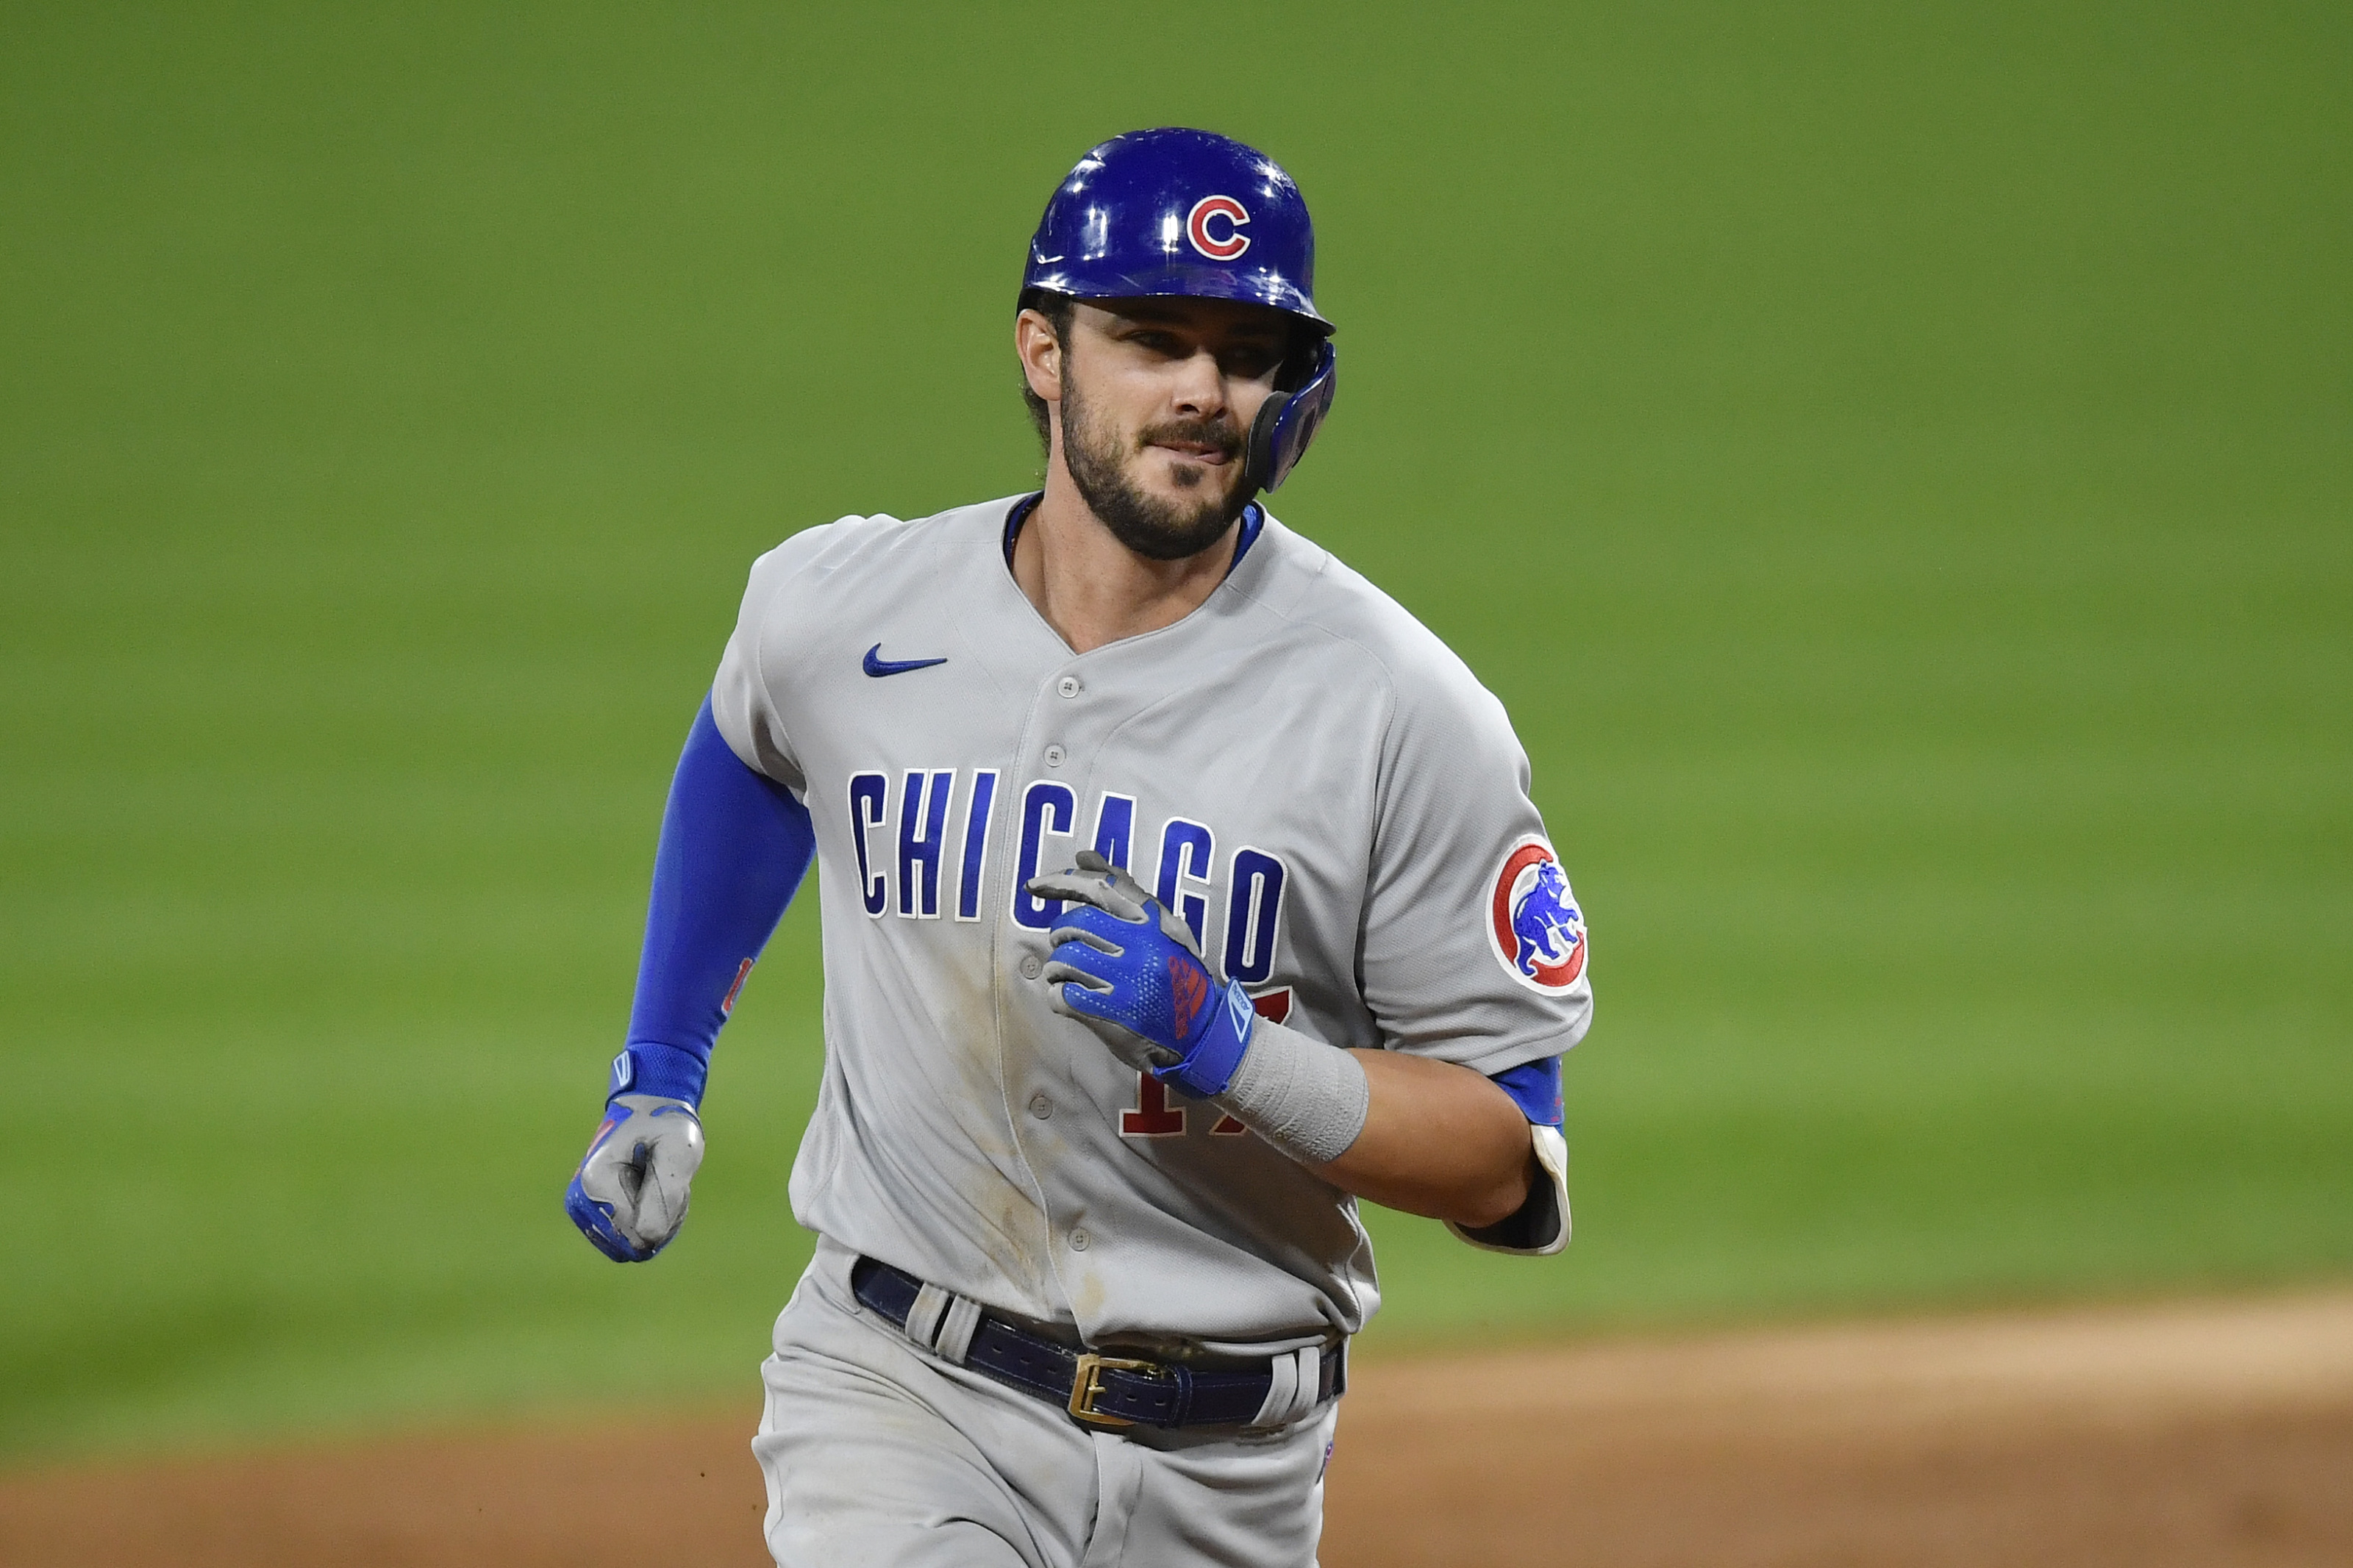 Price of winning: Cubs' Kris Bryant has top-selling MLB jersey - ABC7 New  York